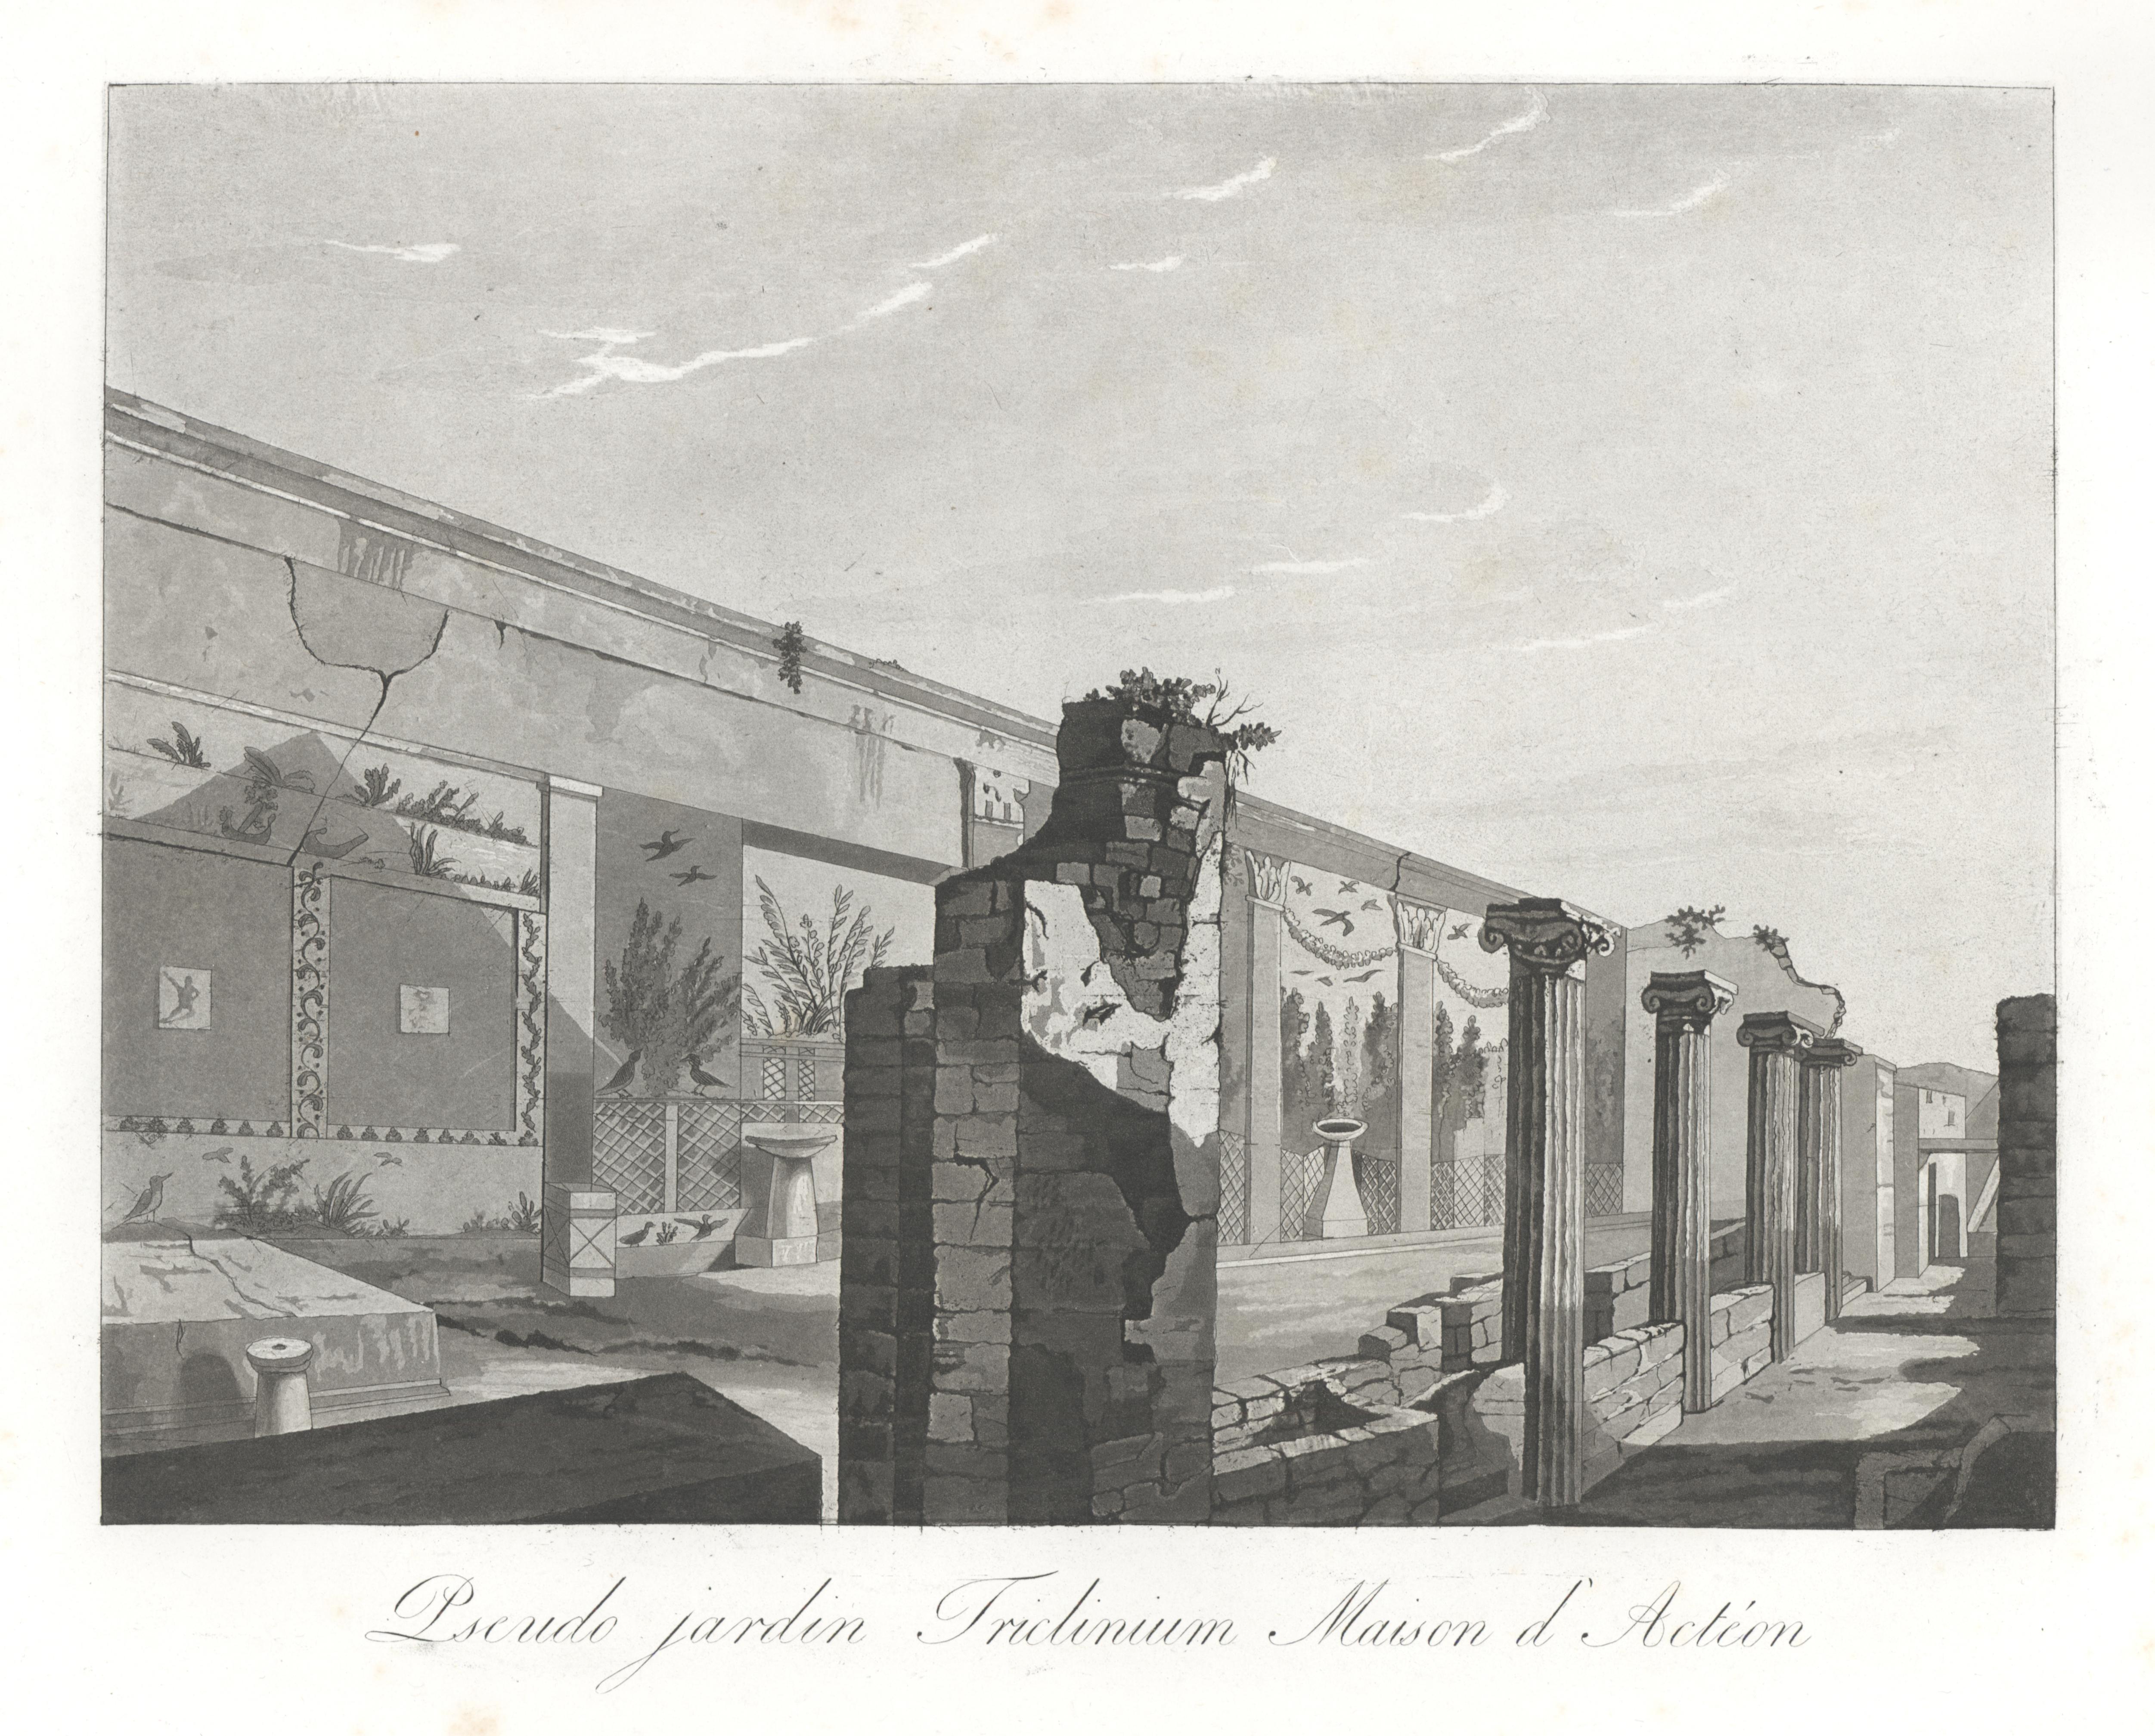 Group of 5 Aquatint Engravings of the Ancient Italian City of Pompei  - Gray Landscape Print by  Paolo Fumagalli